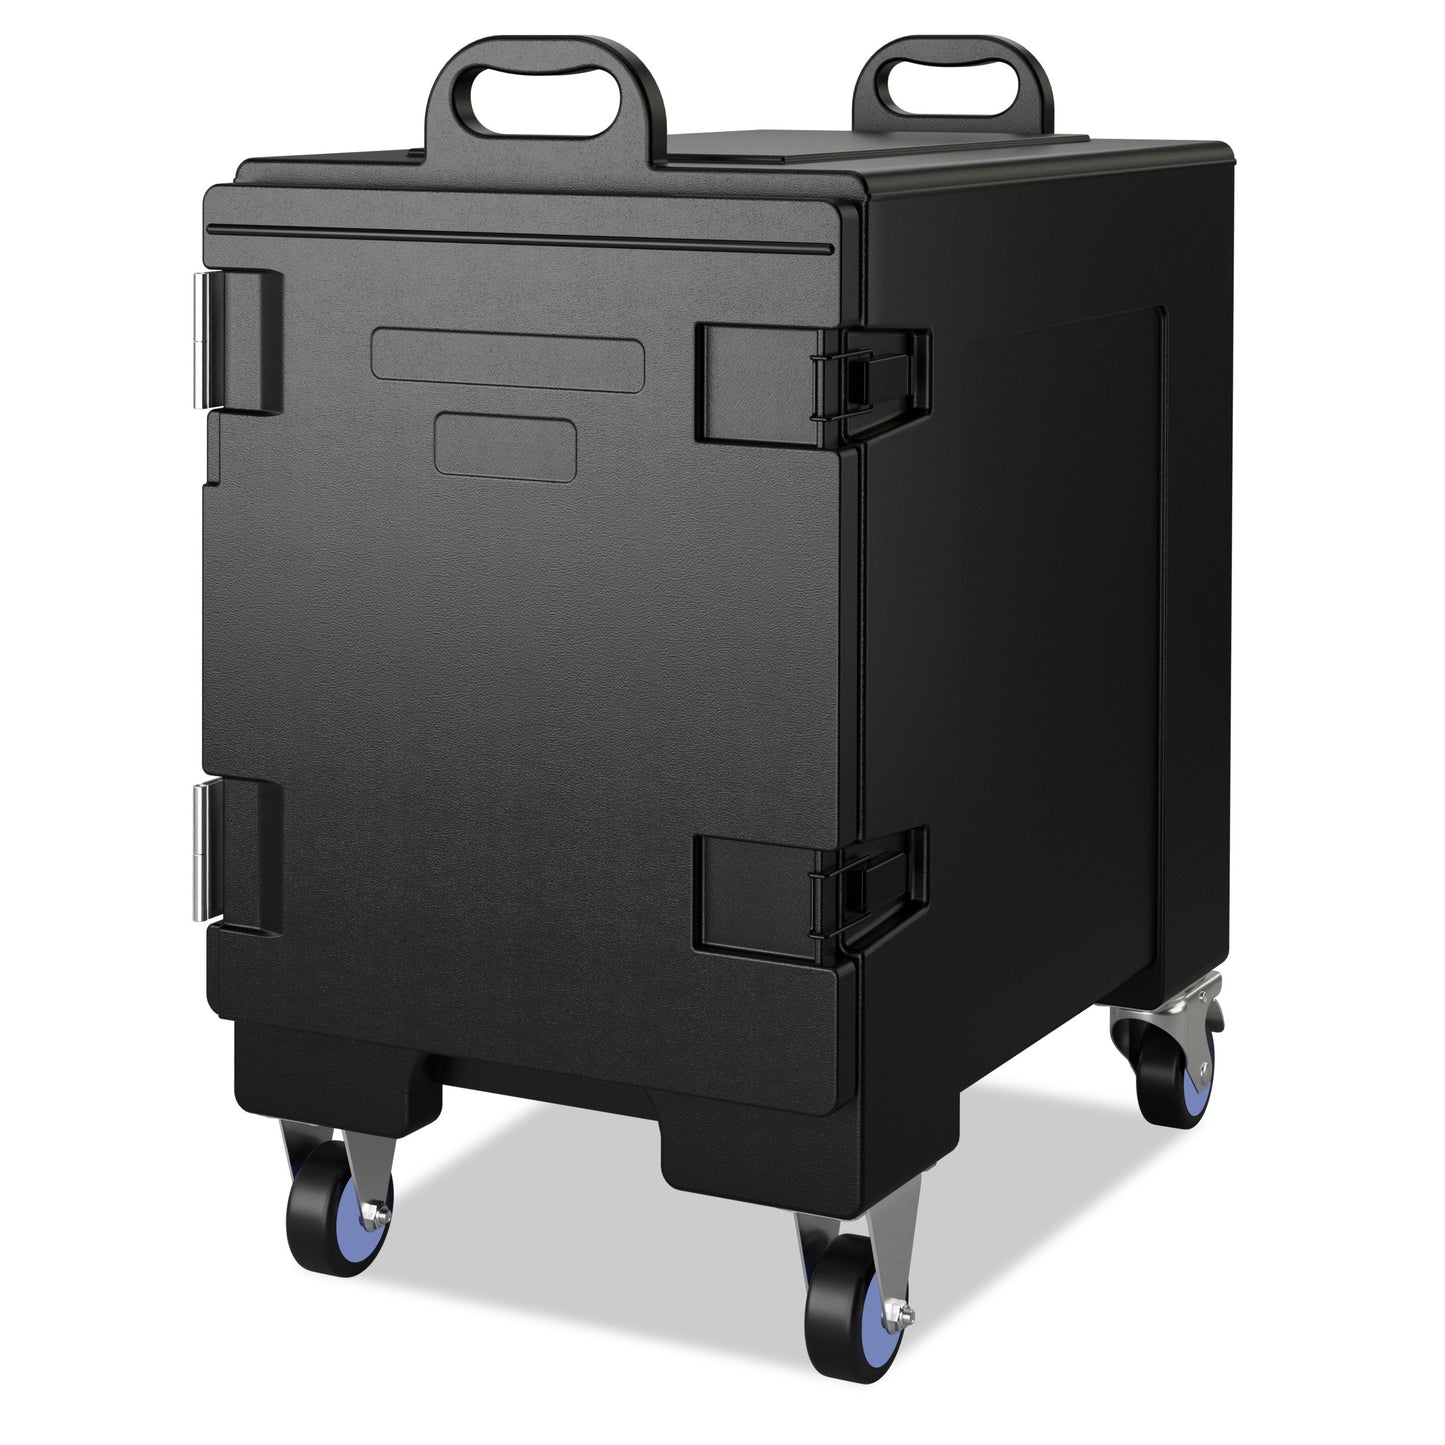 81 Quart Capacity End-loading Insulated Food Pan Carrier with Wheels, Black